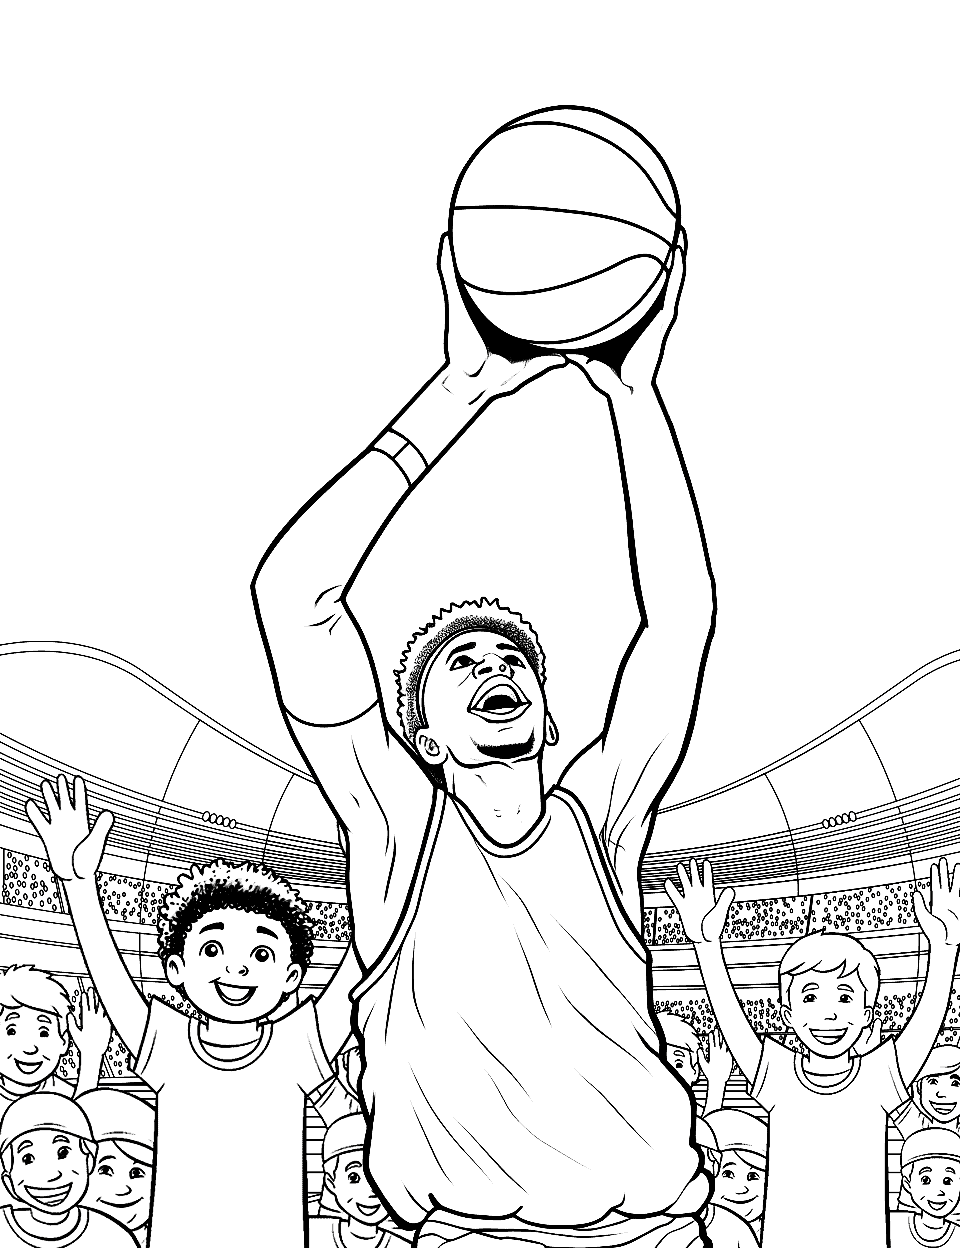 NBA Championship Moment Basketball Coloring Page - A player shooting a winning basket with a large crowd cheering in the background.